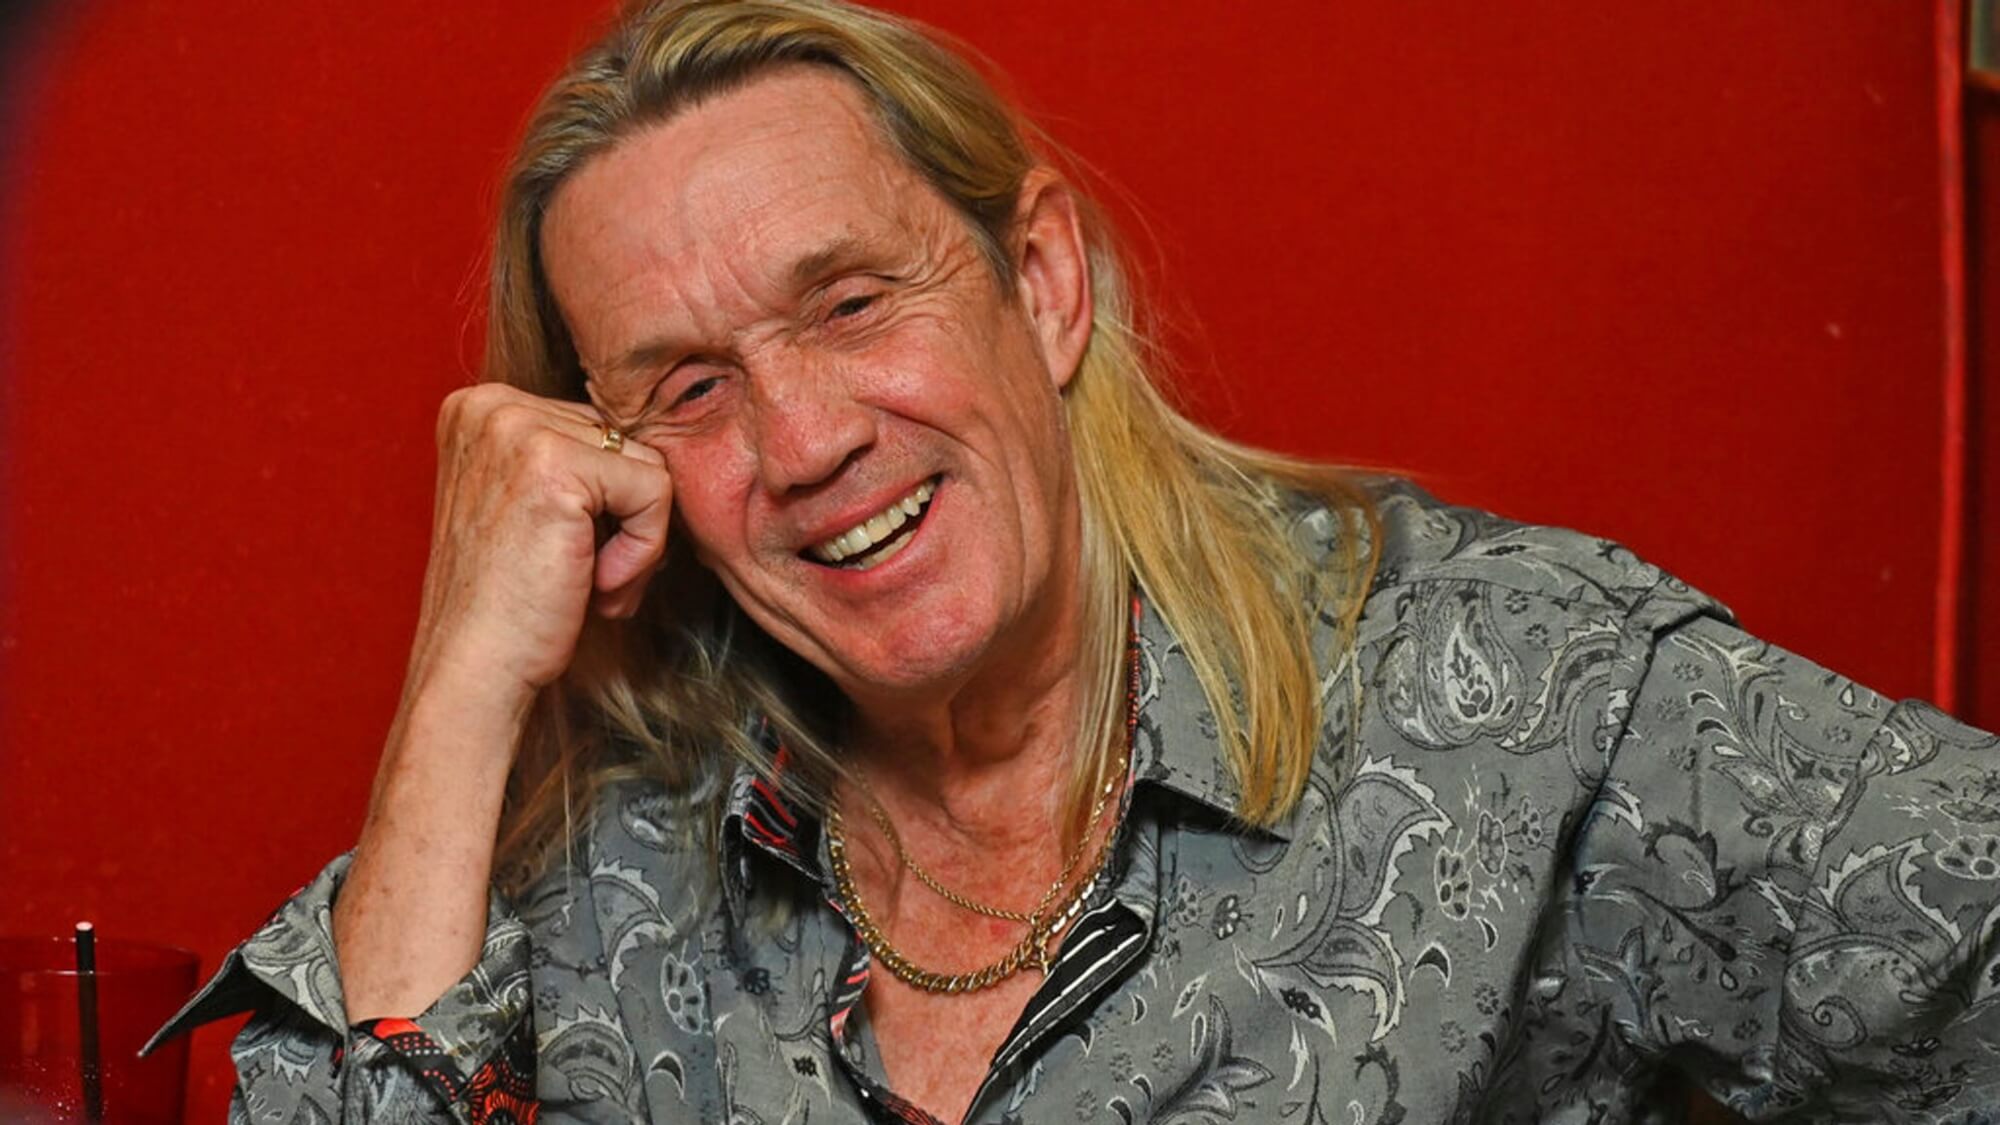 24-astonishing-facts-about-nicko-mcbrain